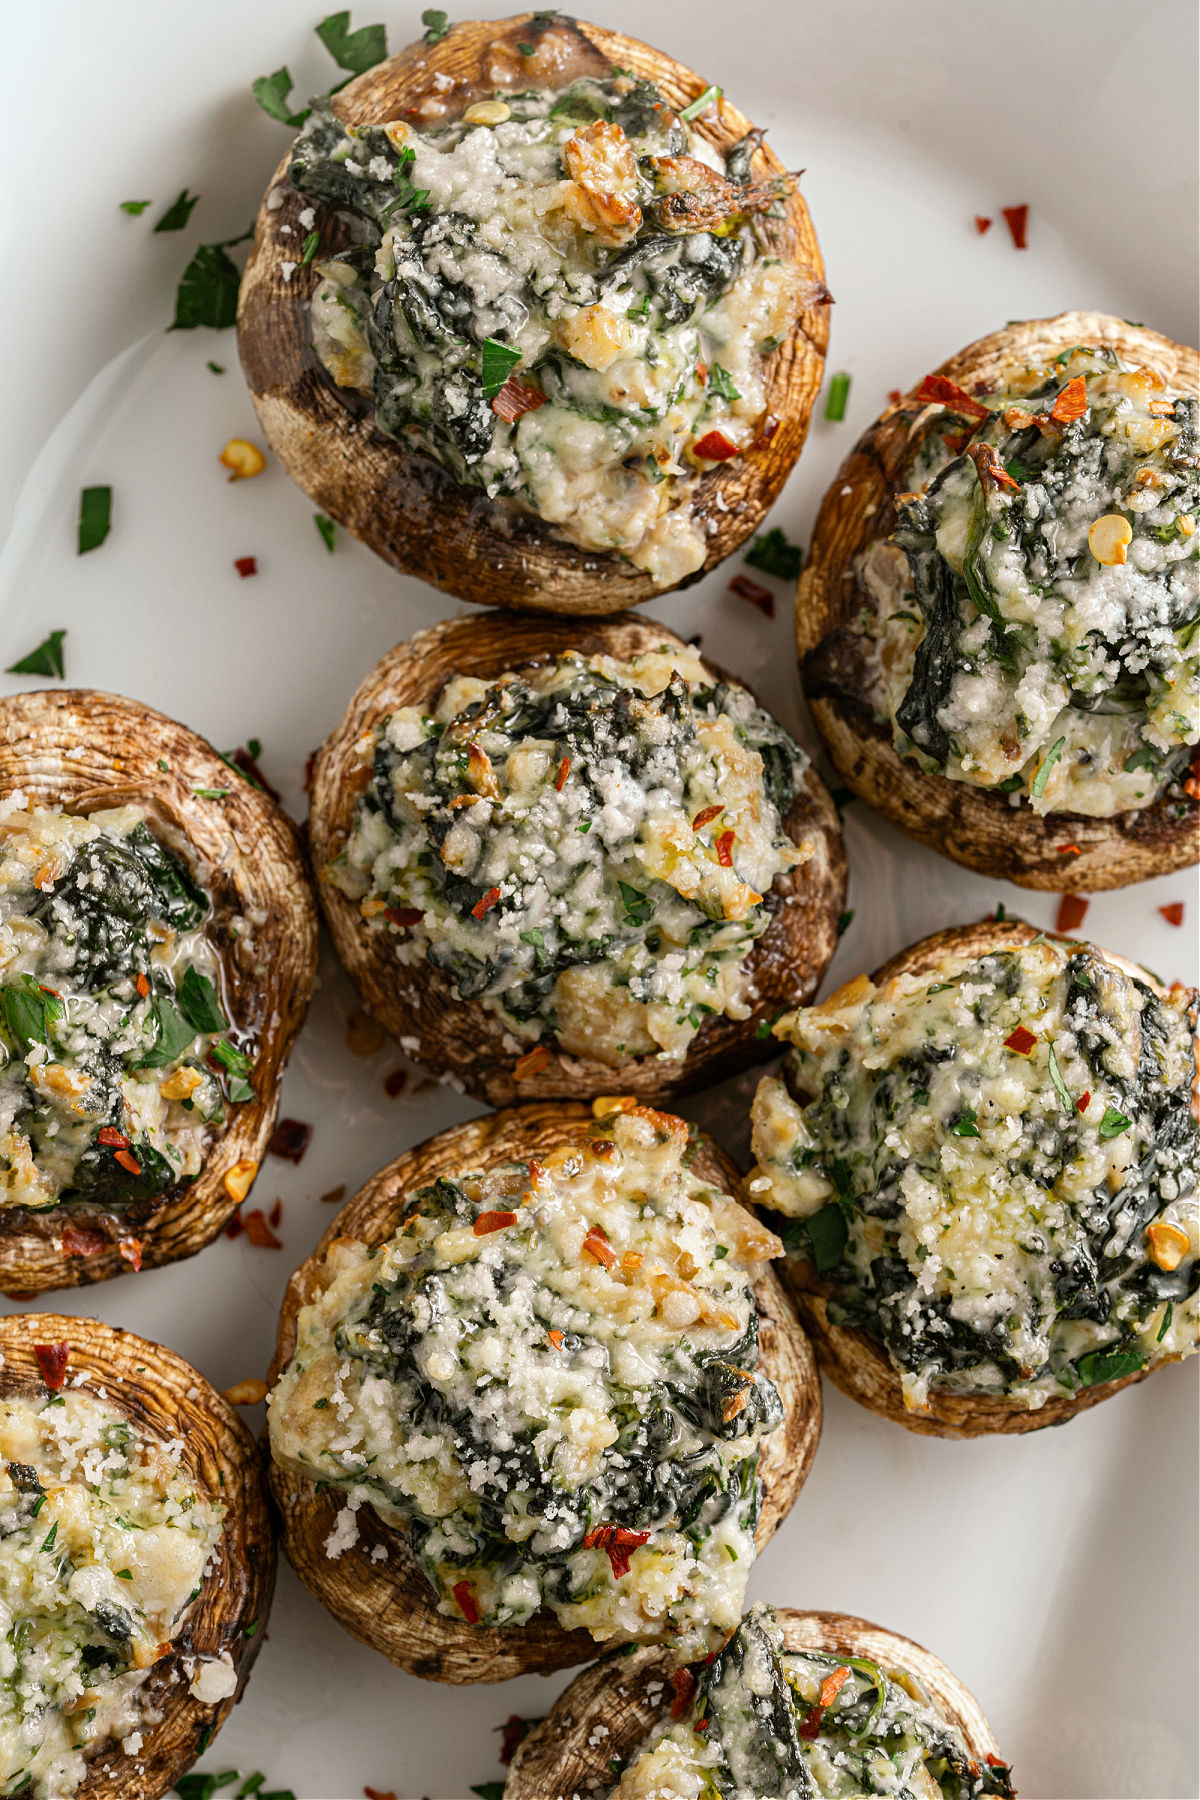 Stuffed mushrooms on a white plate with baked cheese on top.